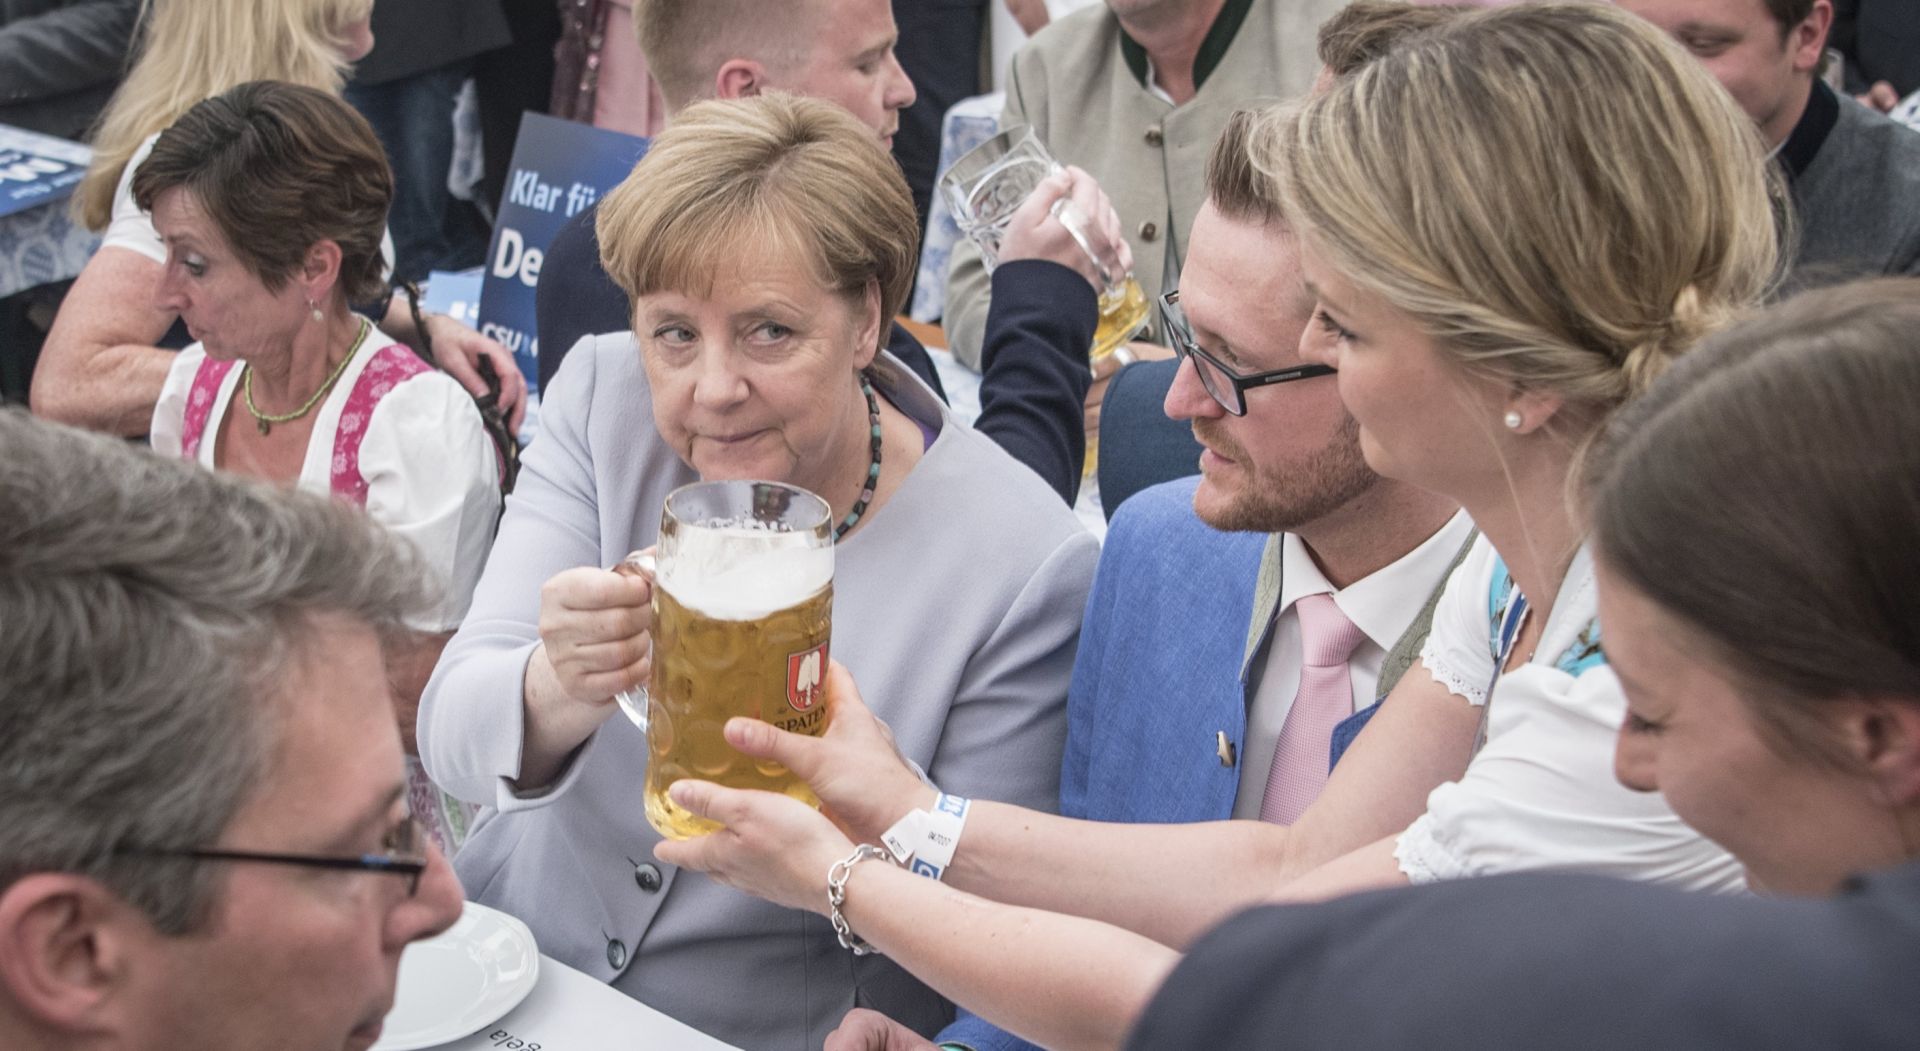 epa05995478 Germany's Christian Democratic Union (CDU) party chairwoman and German Chancellor Angela Merkel receives a glass of beer during an election campaign event of the German Christian Social Union (CSU) party at the 46th Truderinger Festwoche festival week in Munich, Bavaria, Germany, 28 May 2017.  EPA/CHRISTIAN BRUNA